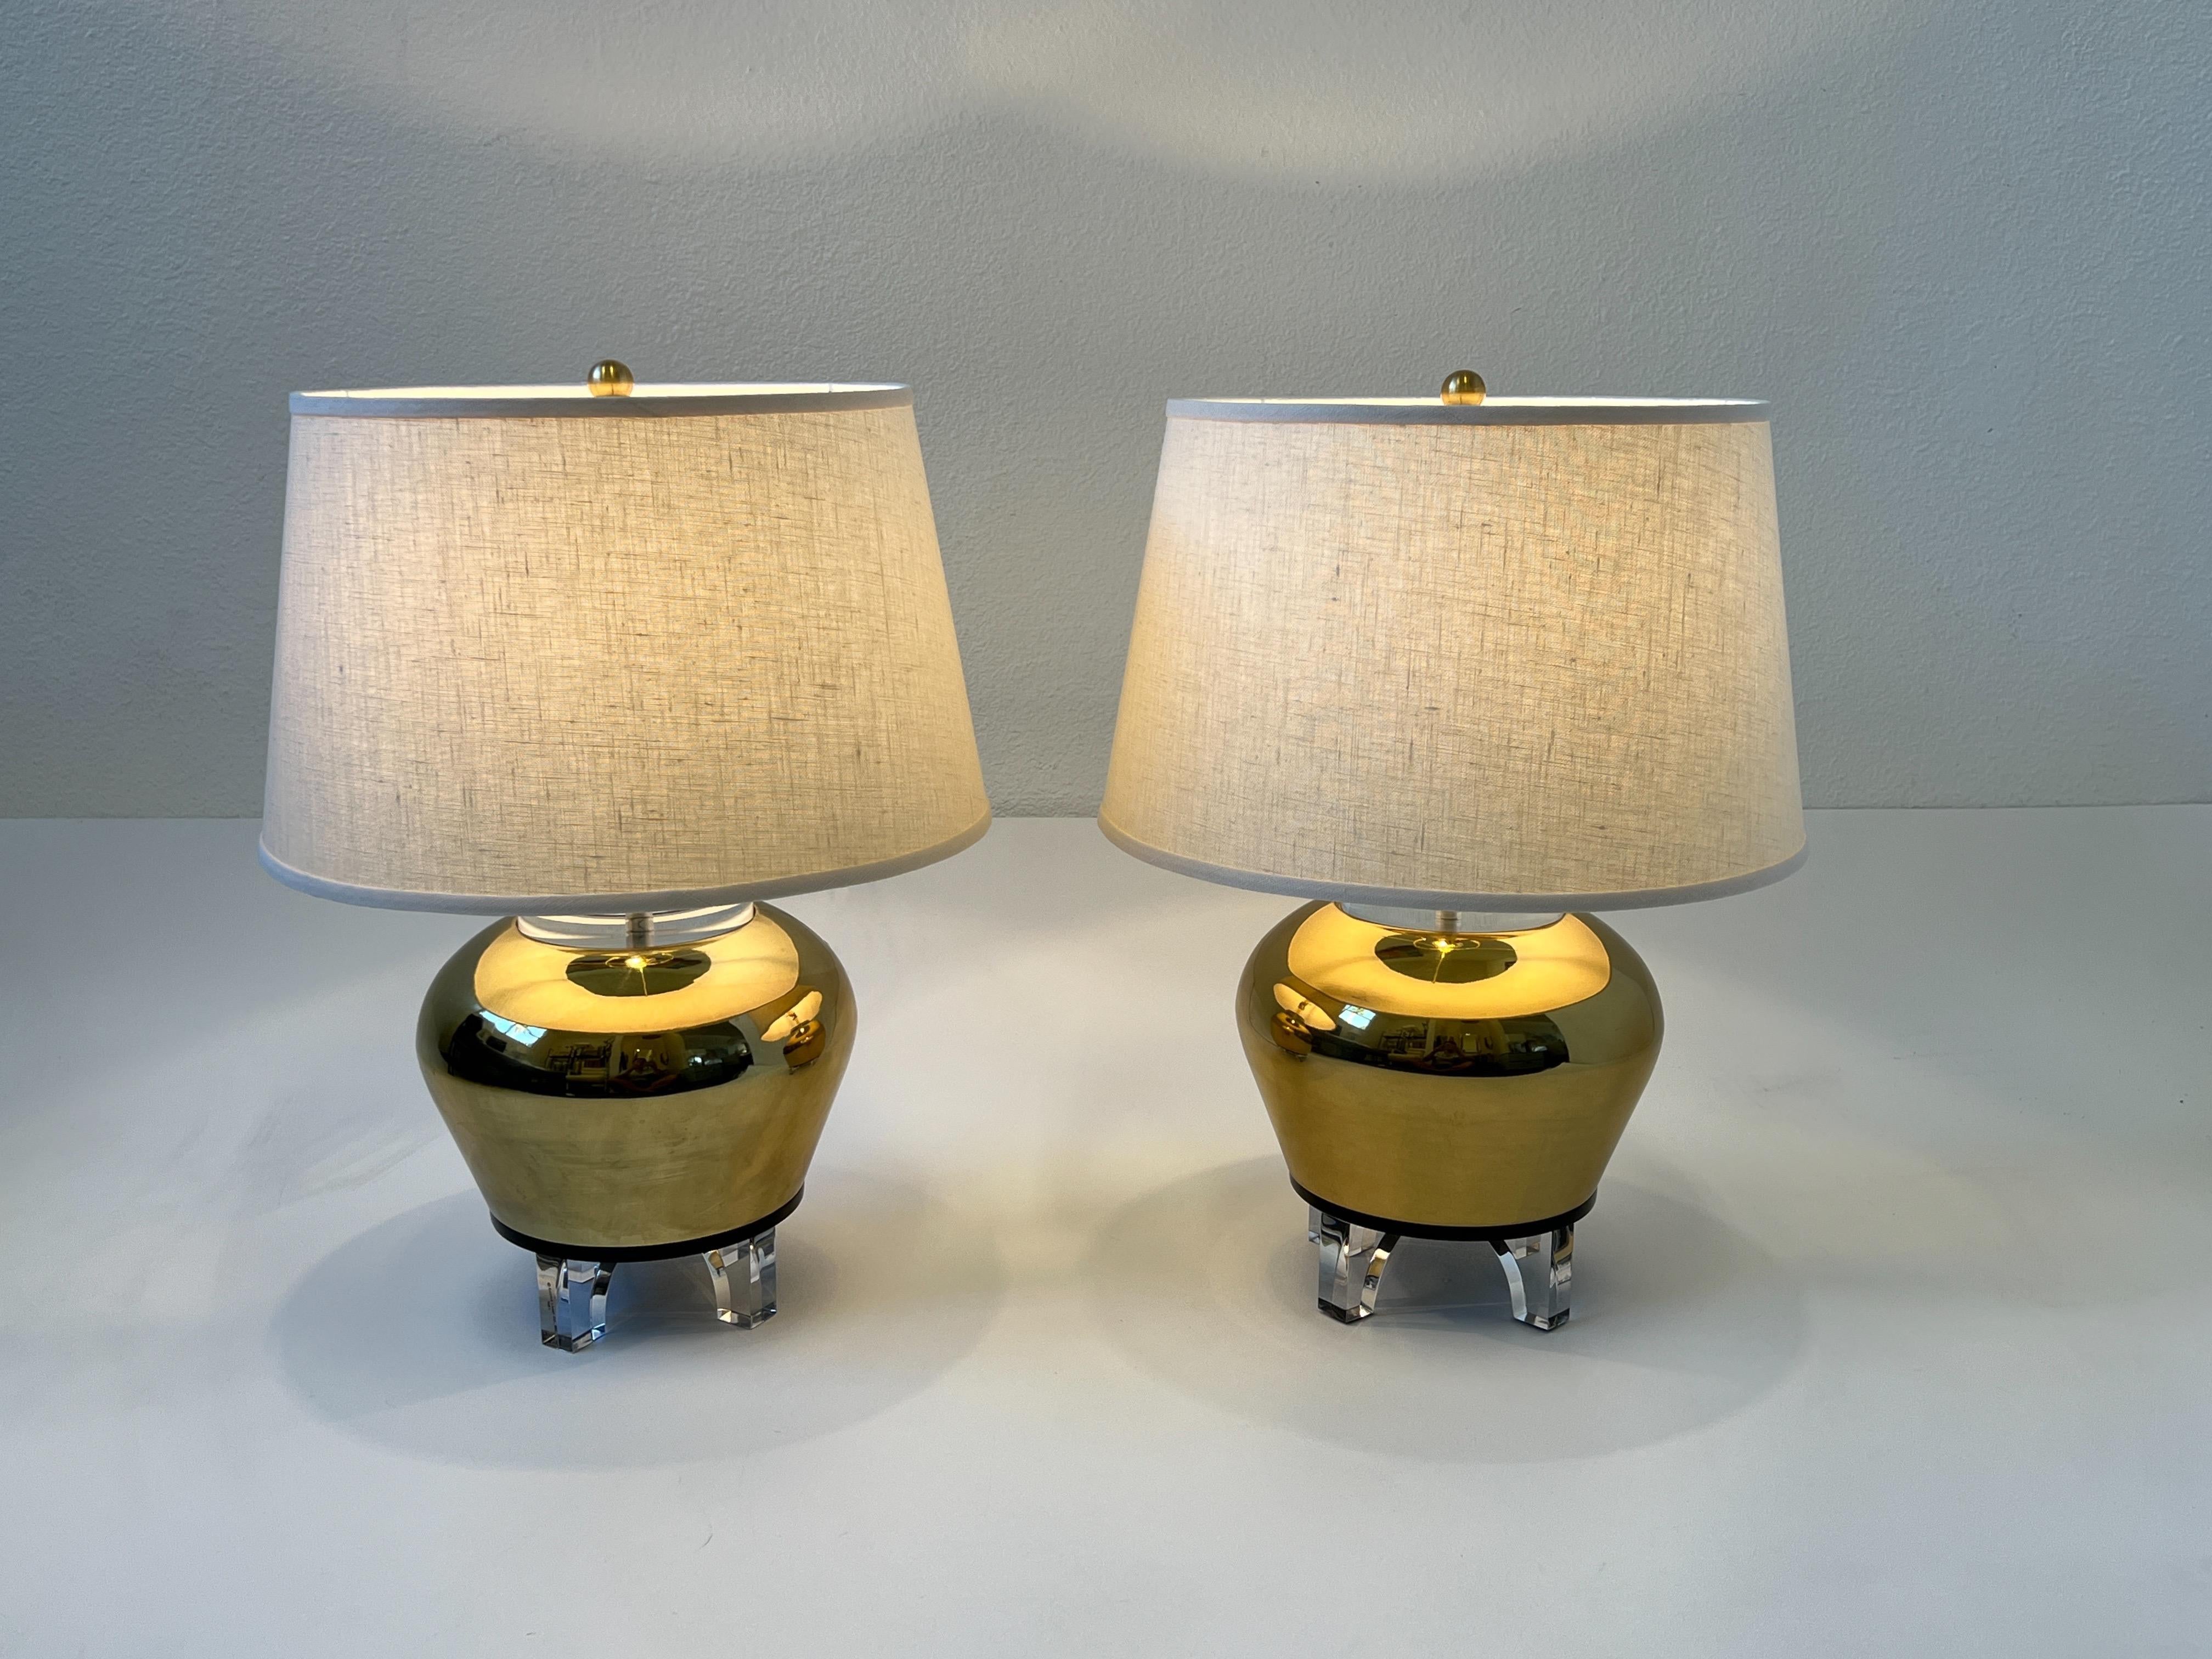 1983 Clear, black lucite and polish brass urn table lamps by Bauer Lamp Company. 
Newly rewired with new brass hardware and new vanilla linen shades. 

Measurements: 16” Diameter, 21.5” High.